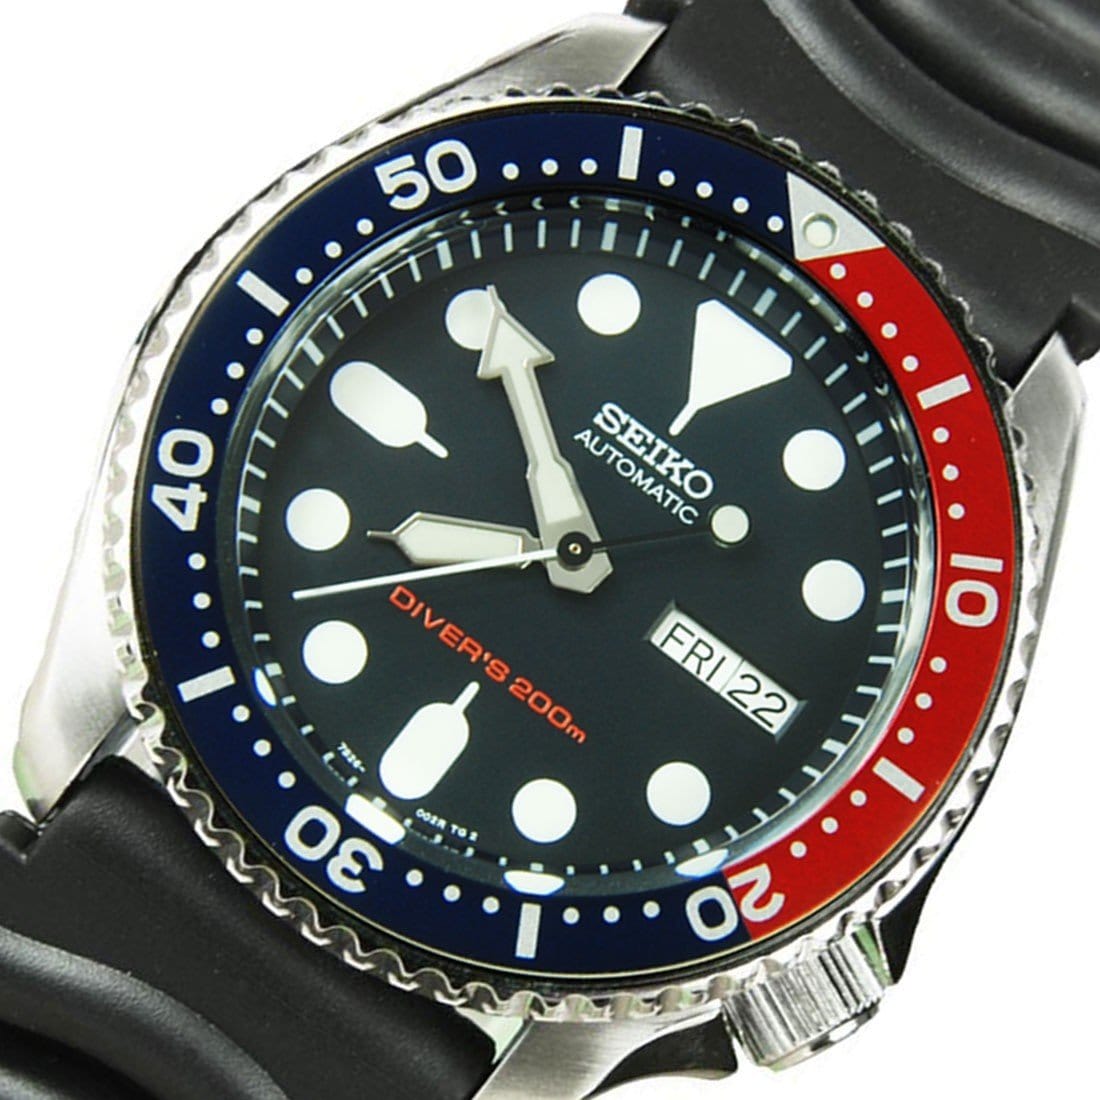 SKX009K1 SKX009 Seiko Automatic Analog Mens Dive Watch with Extra Strap